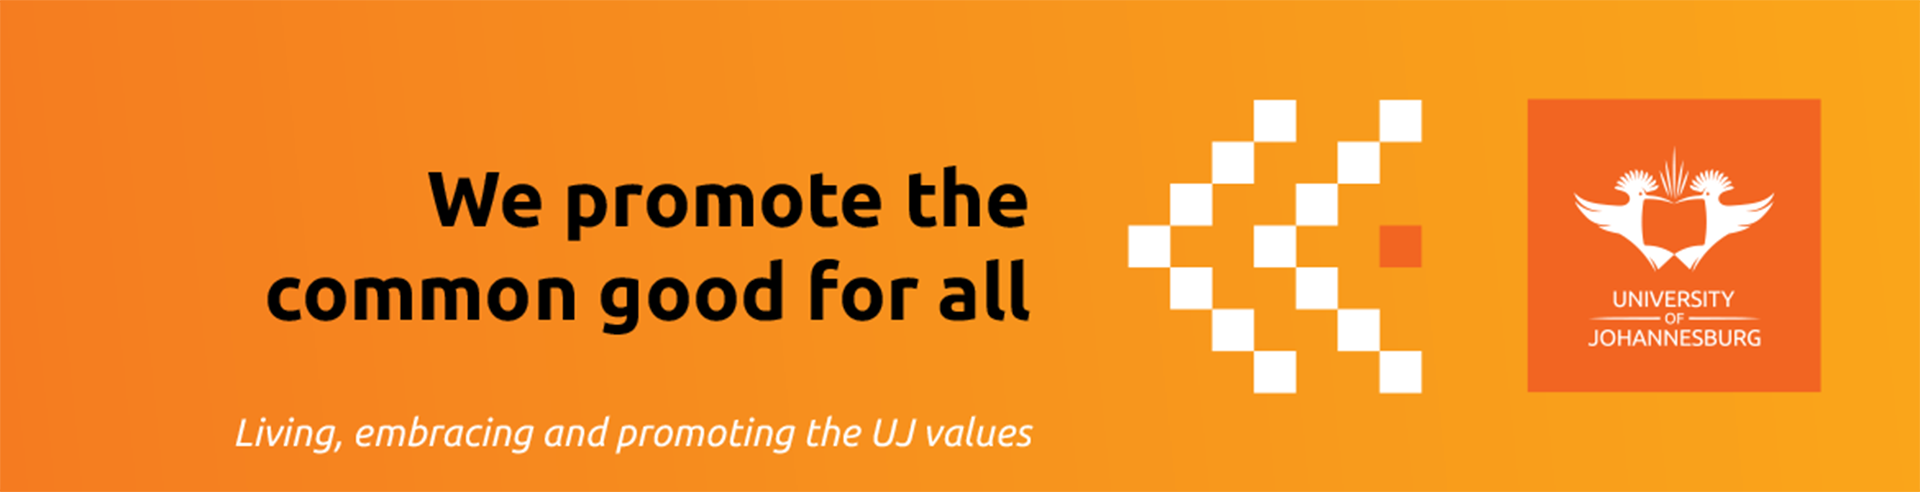 Uj Values Expressions Posters 2020 Ulink 1170x300mm 37